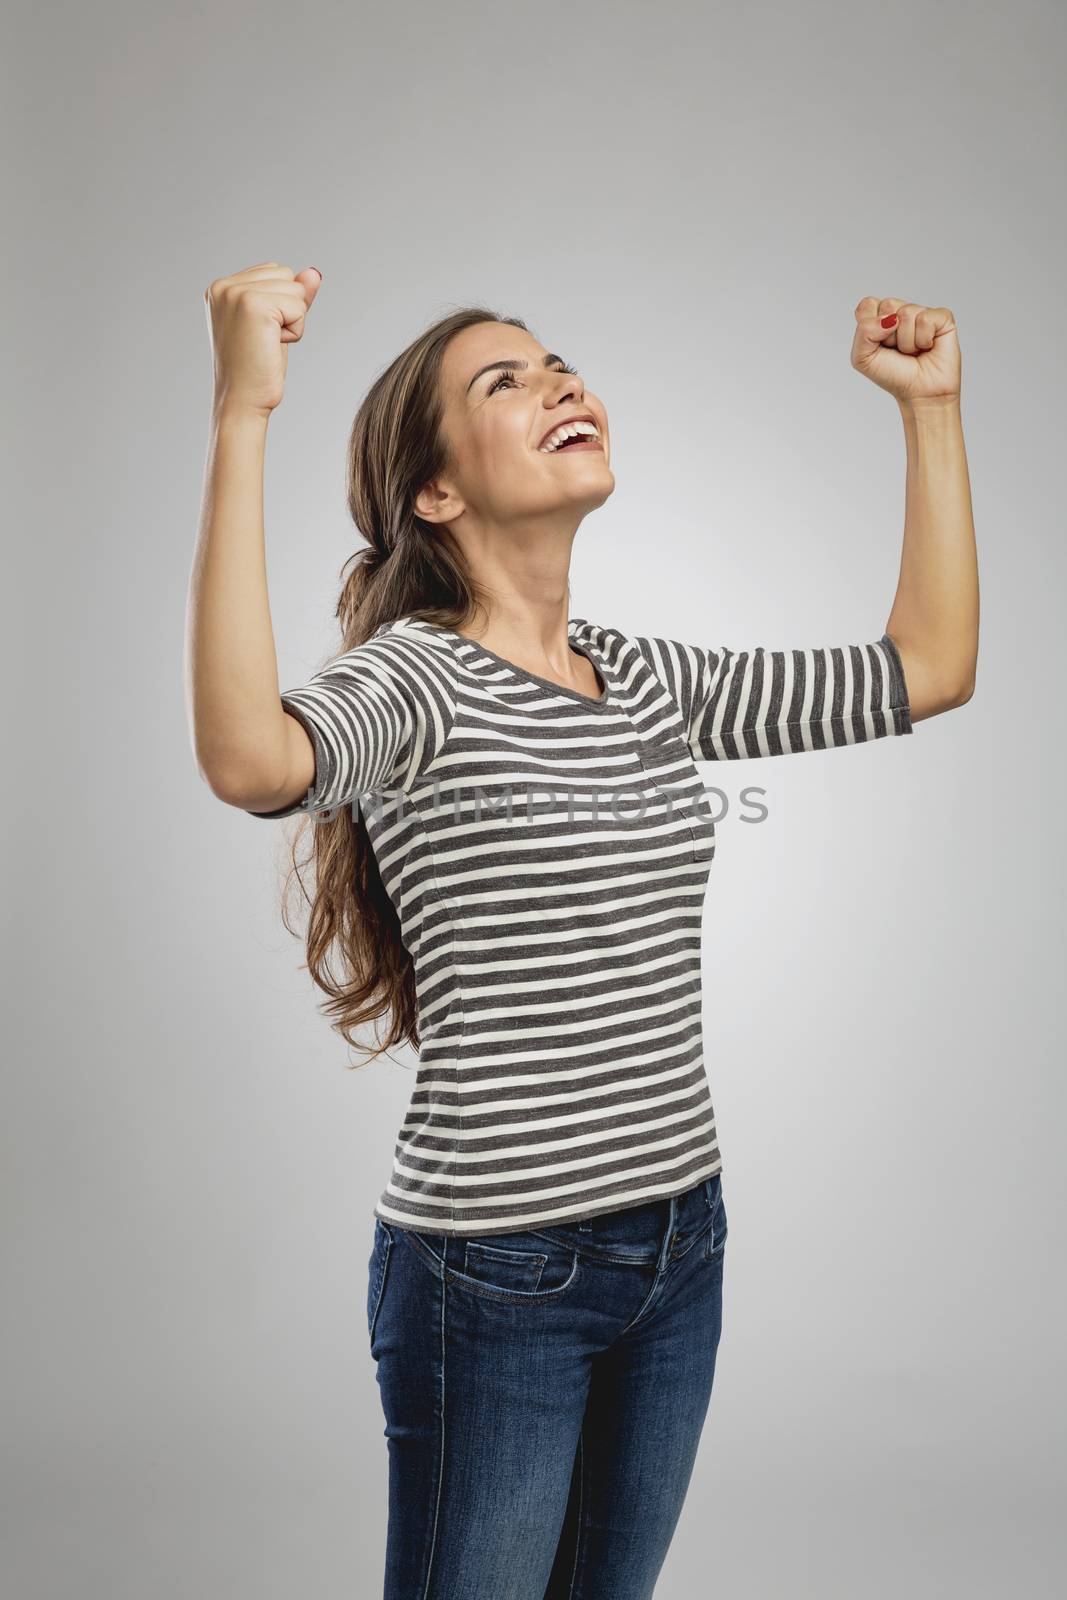 Portrait of a beautiful happy woman with arms raised and looking up